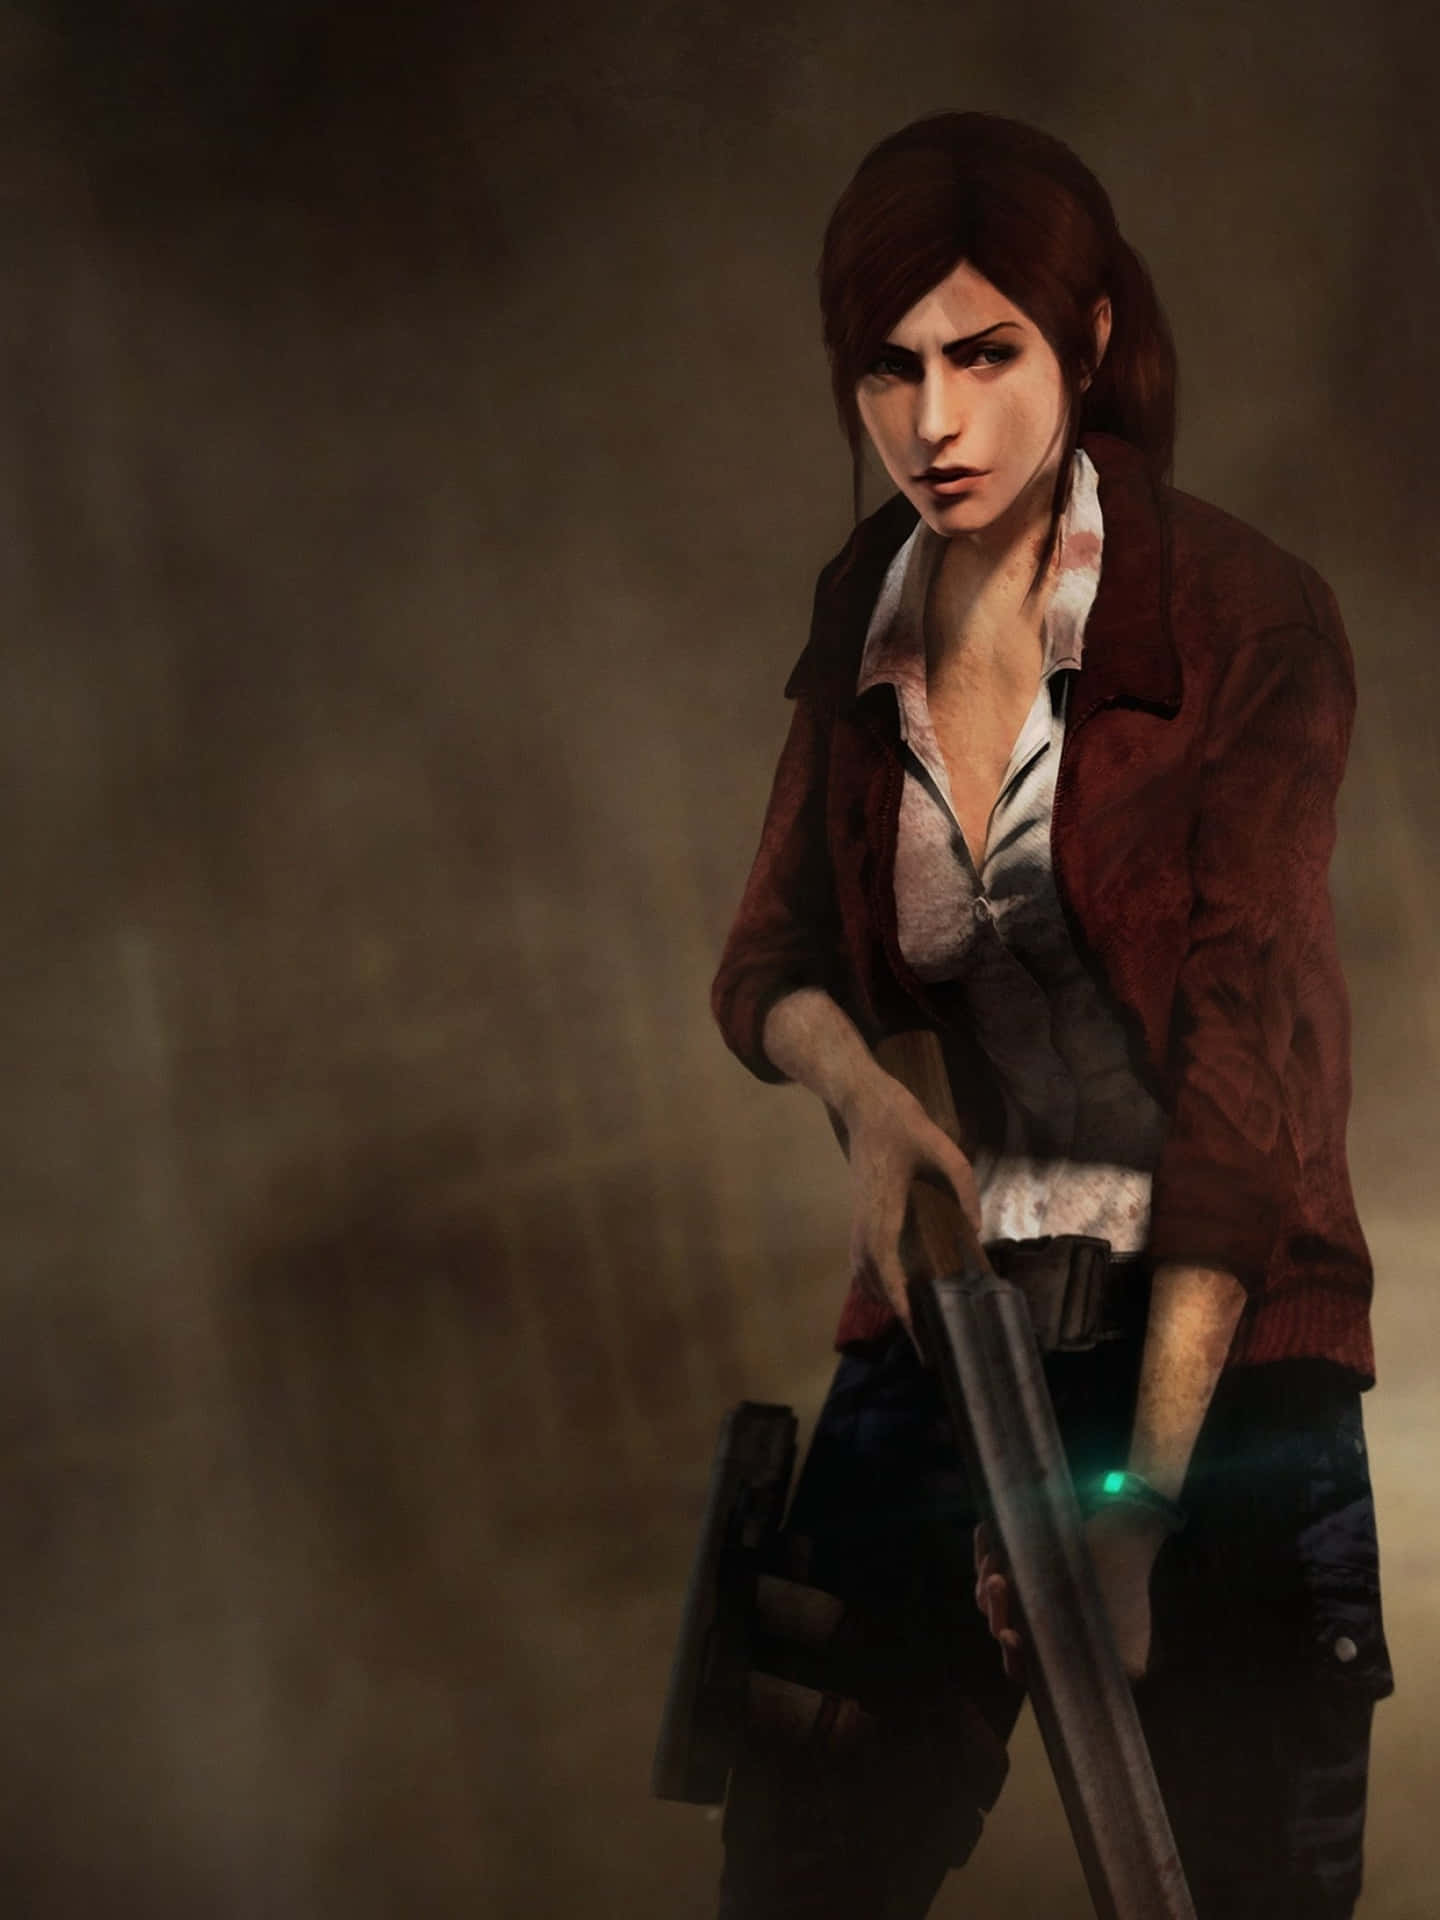 "Don't worry, I've got this." - Claire Redfield, Resident Evil 2 Wallpaper